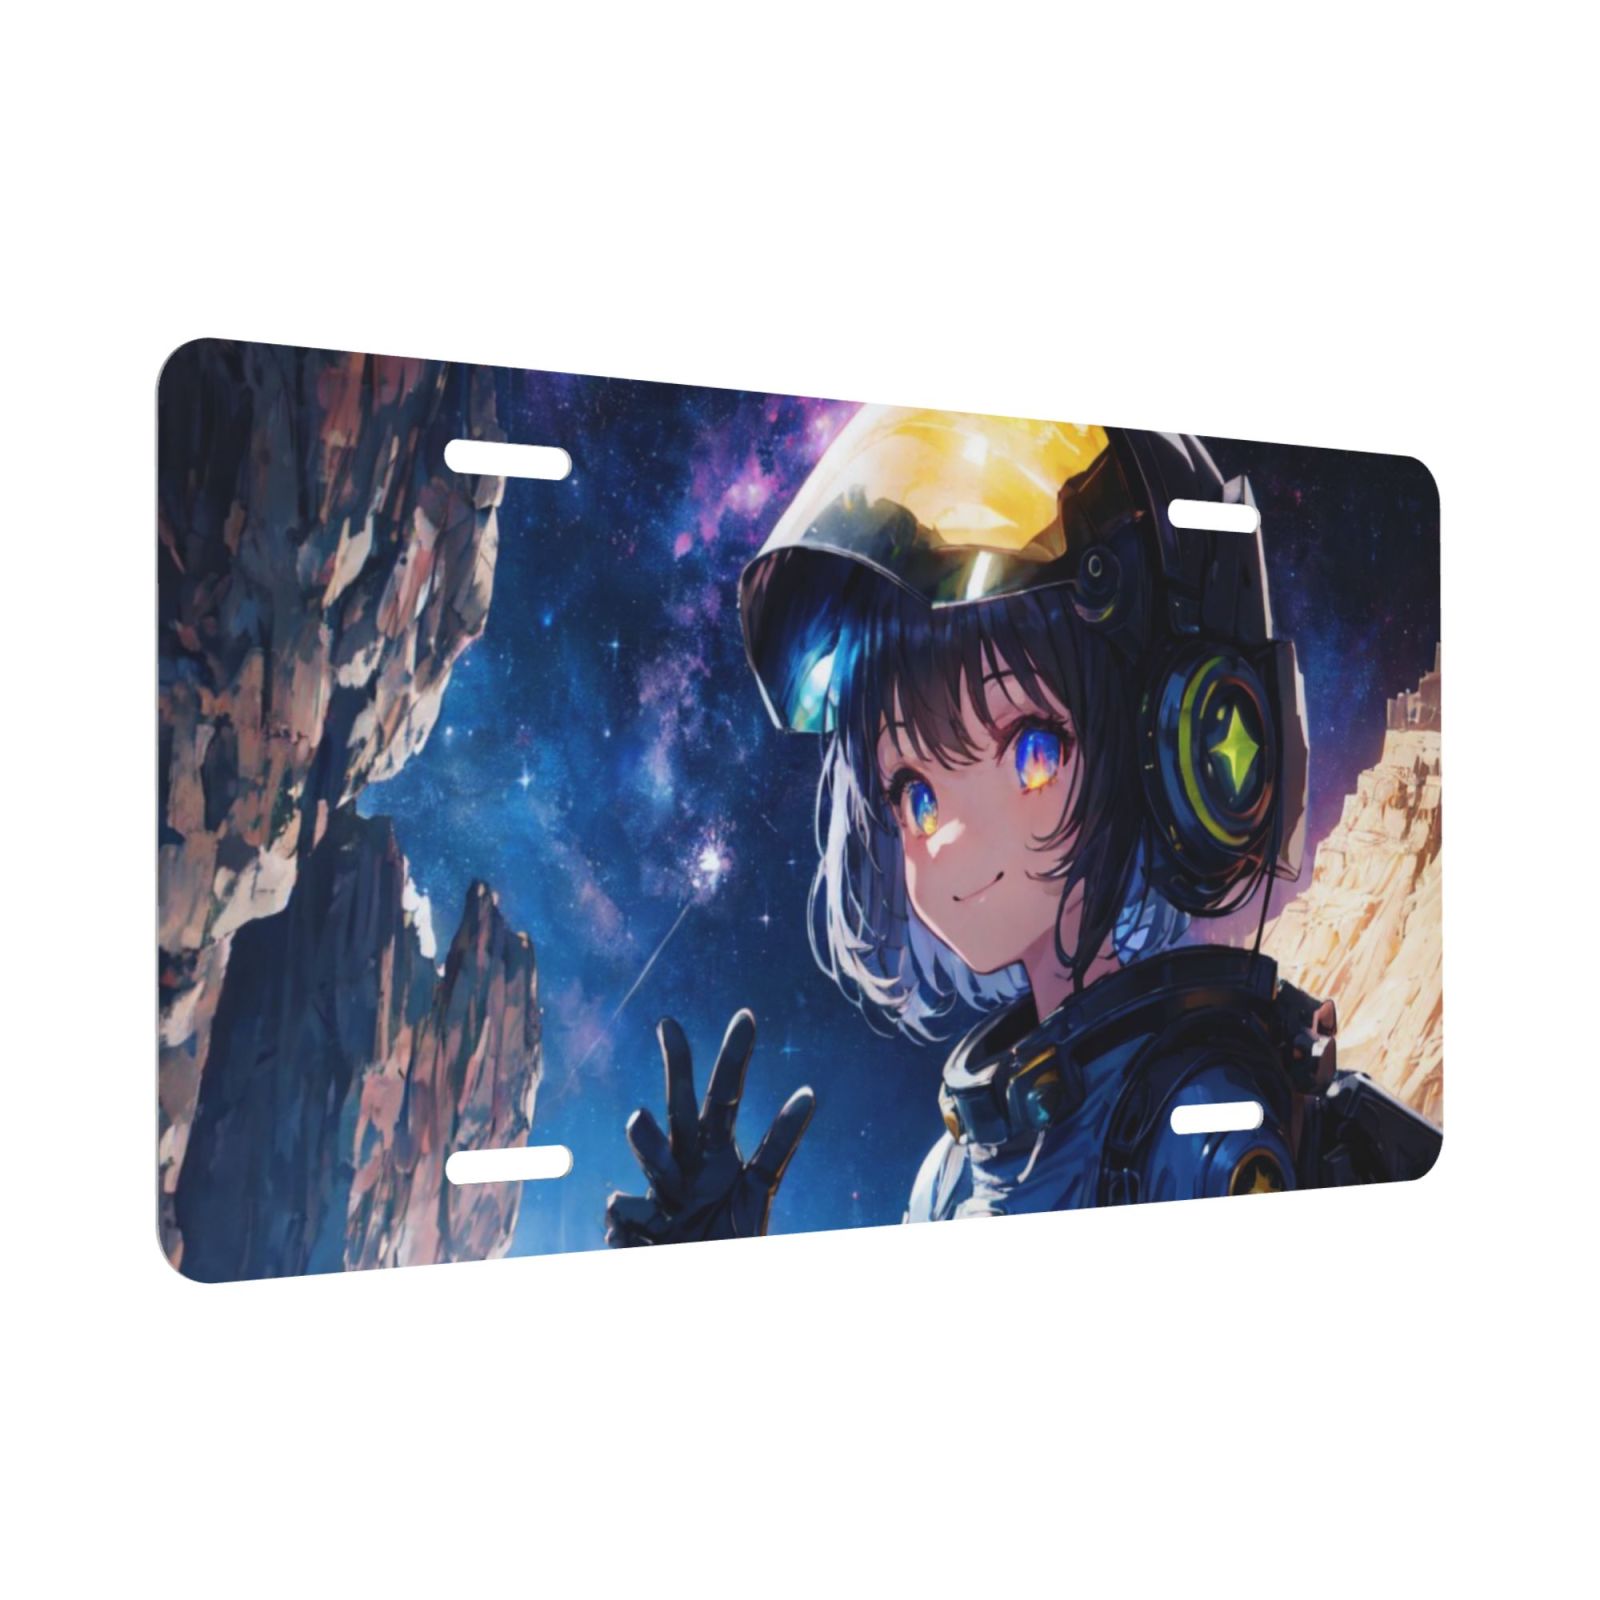 Code Geass Anime Poster Tin Metal Sign Vintage Wall Plaque Decor 8x12 Inch  : Home & Kitchen - Amazon.com